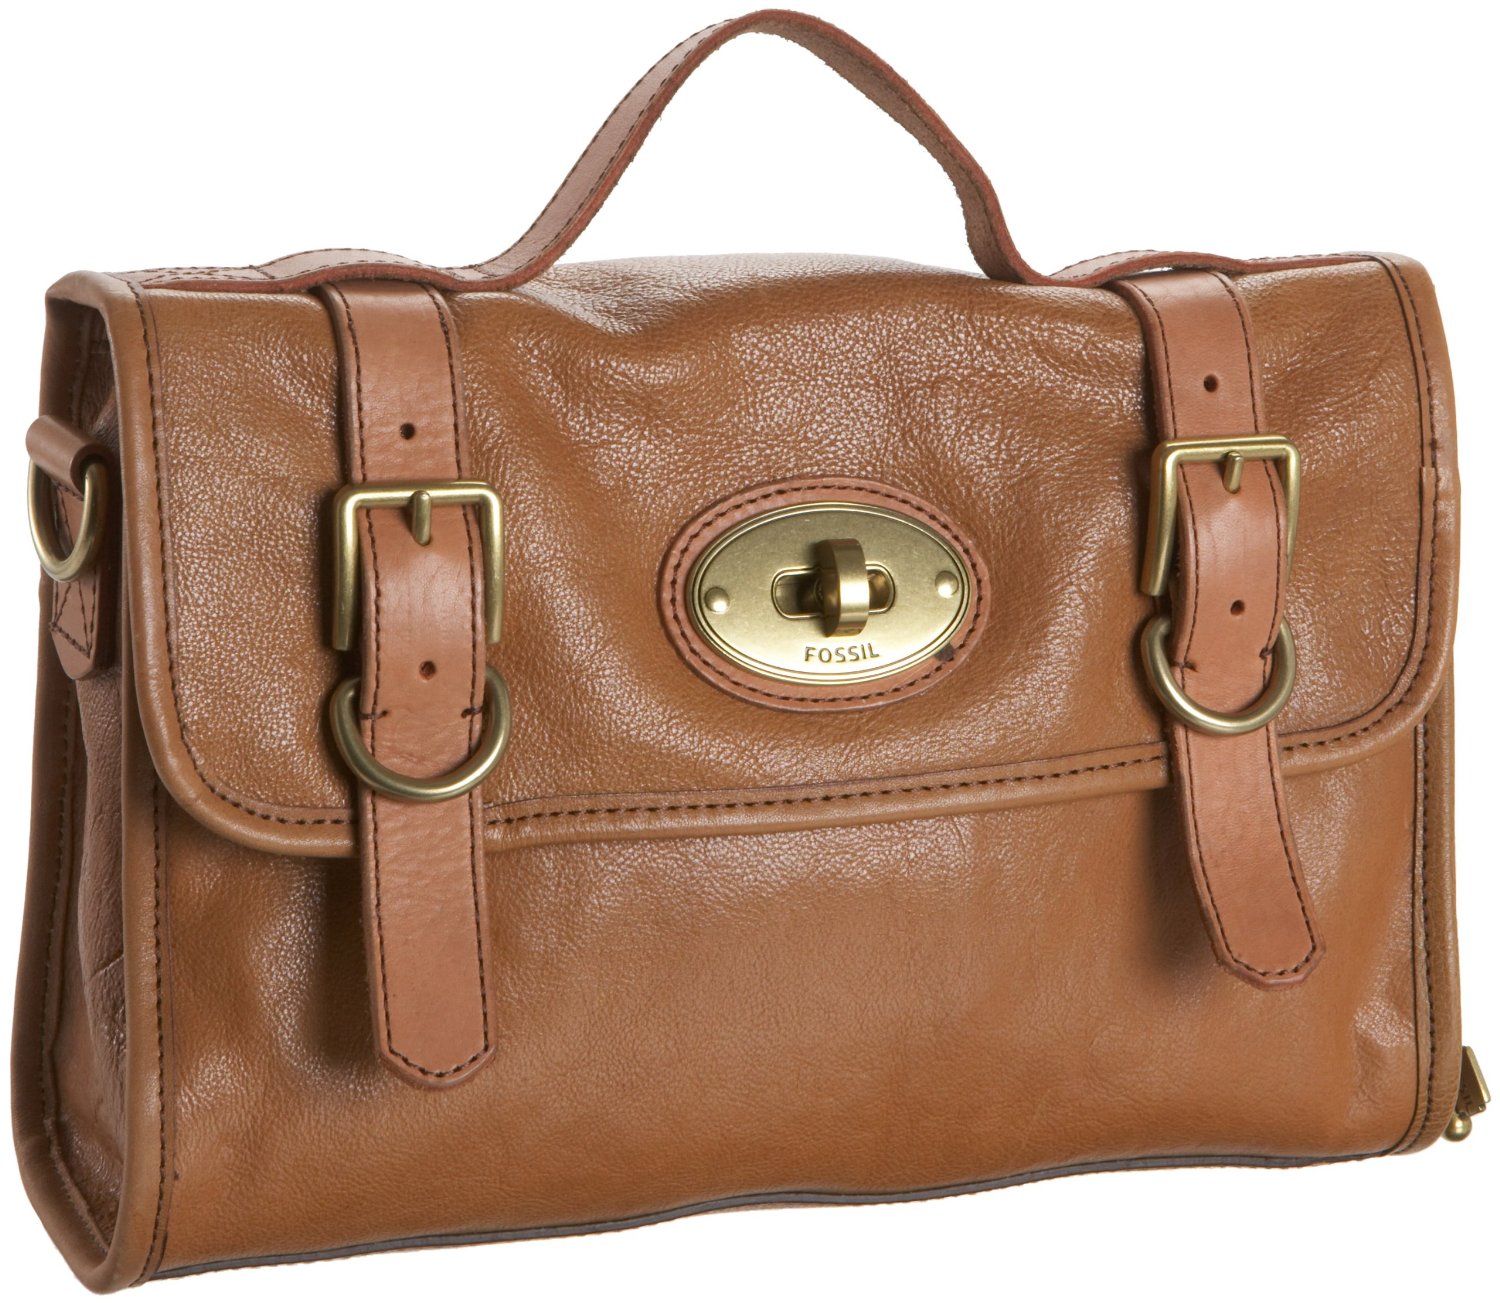 Fossil Vintage Re Issue Satchel in Brown (tan) | Lyst